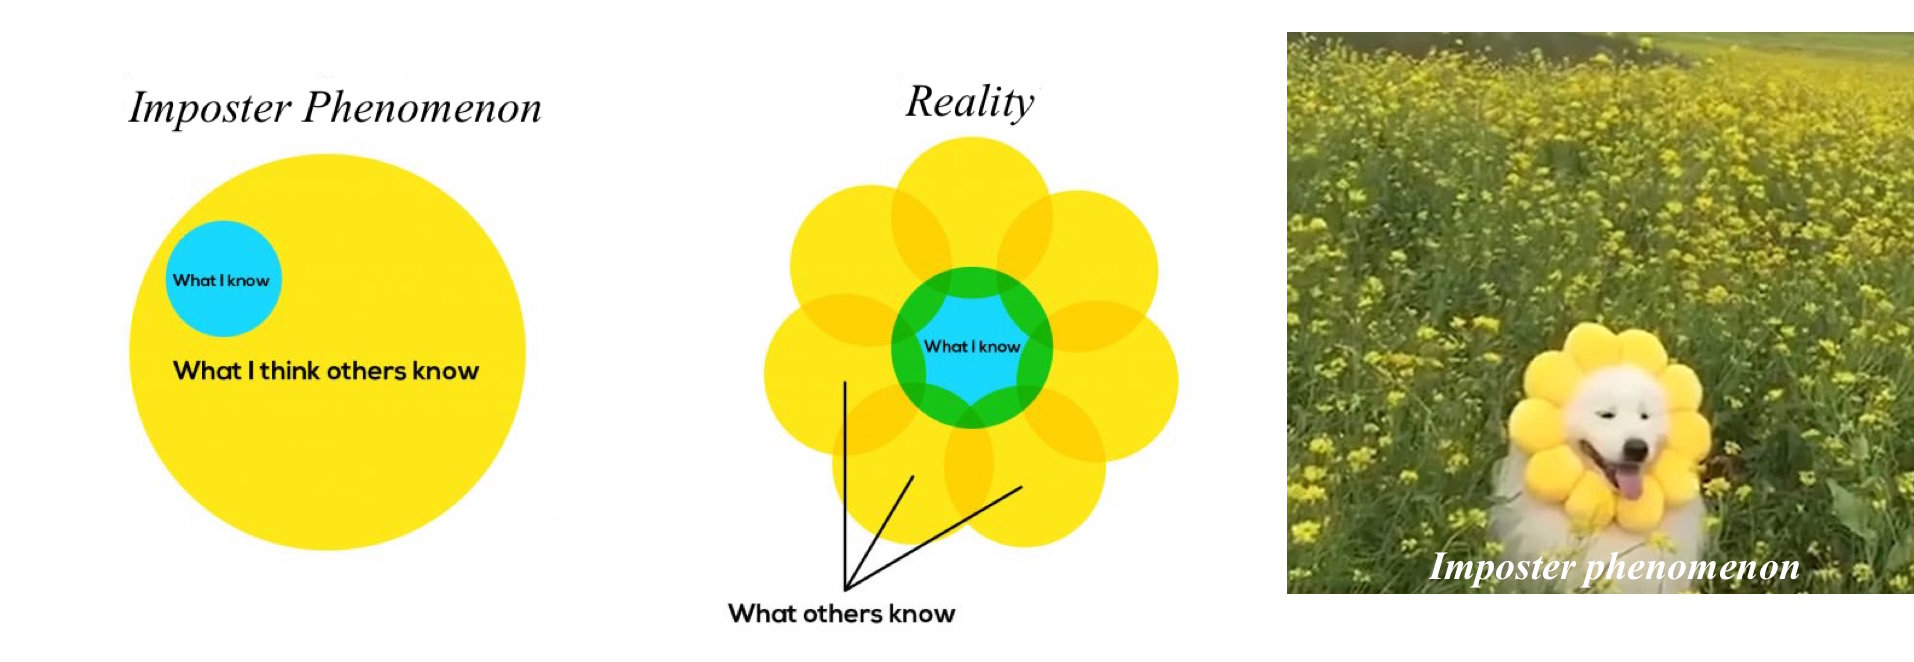 Left: big circle "what I think others know" with smaller circle "what I know" inside denoting imposter phenomenon; Middle: circle "what I know" with overlapping circles on the outside "what others know" denoting reality; Right: dog in a flower costume in the middle of a field of flowers representing the imposter phenomenon